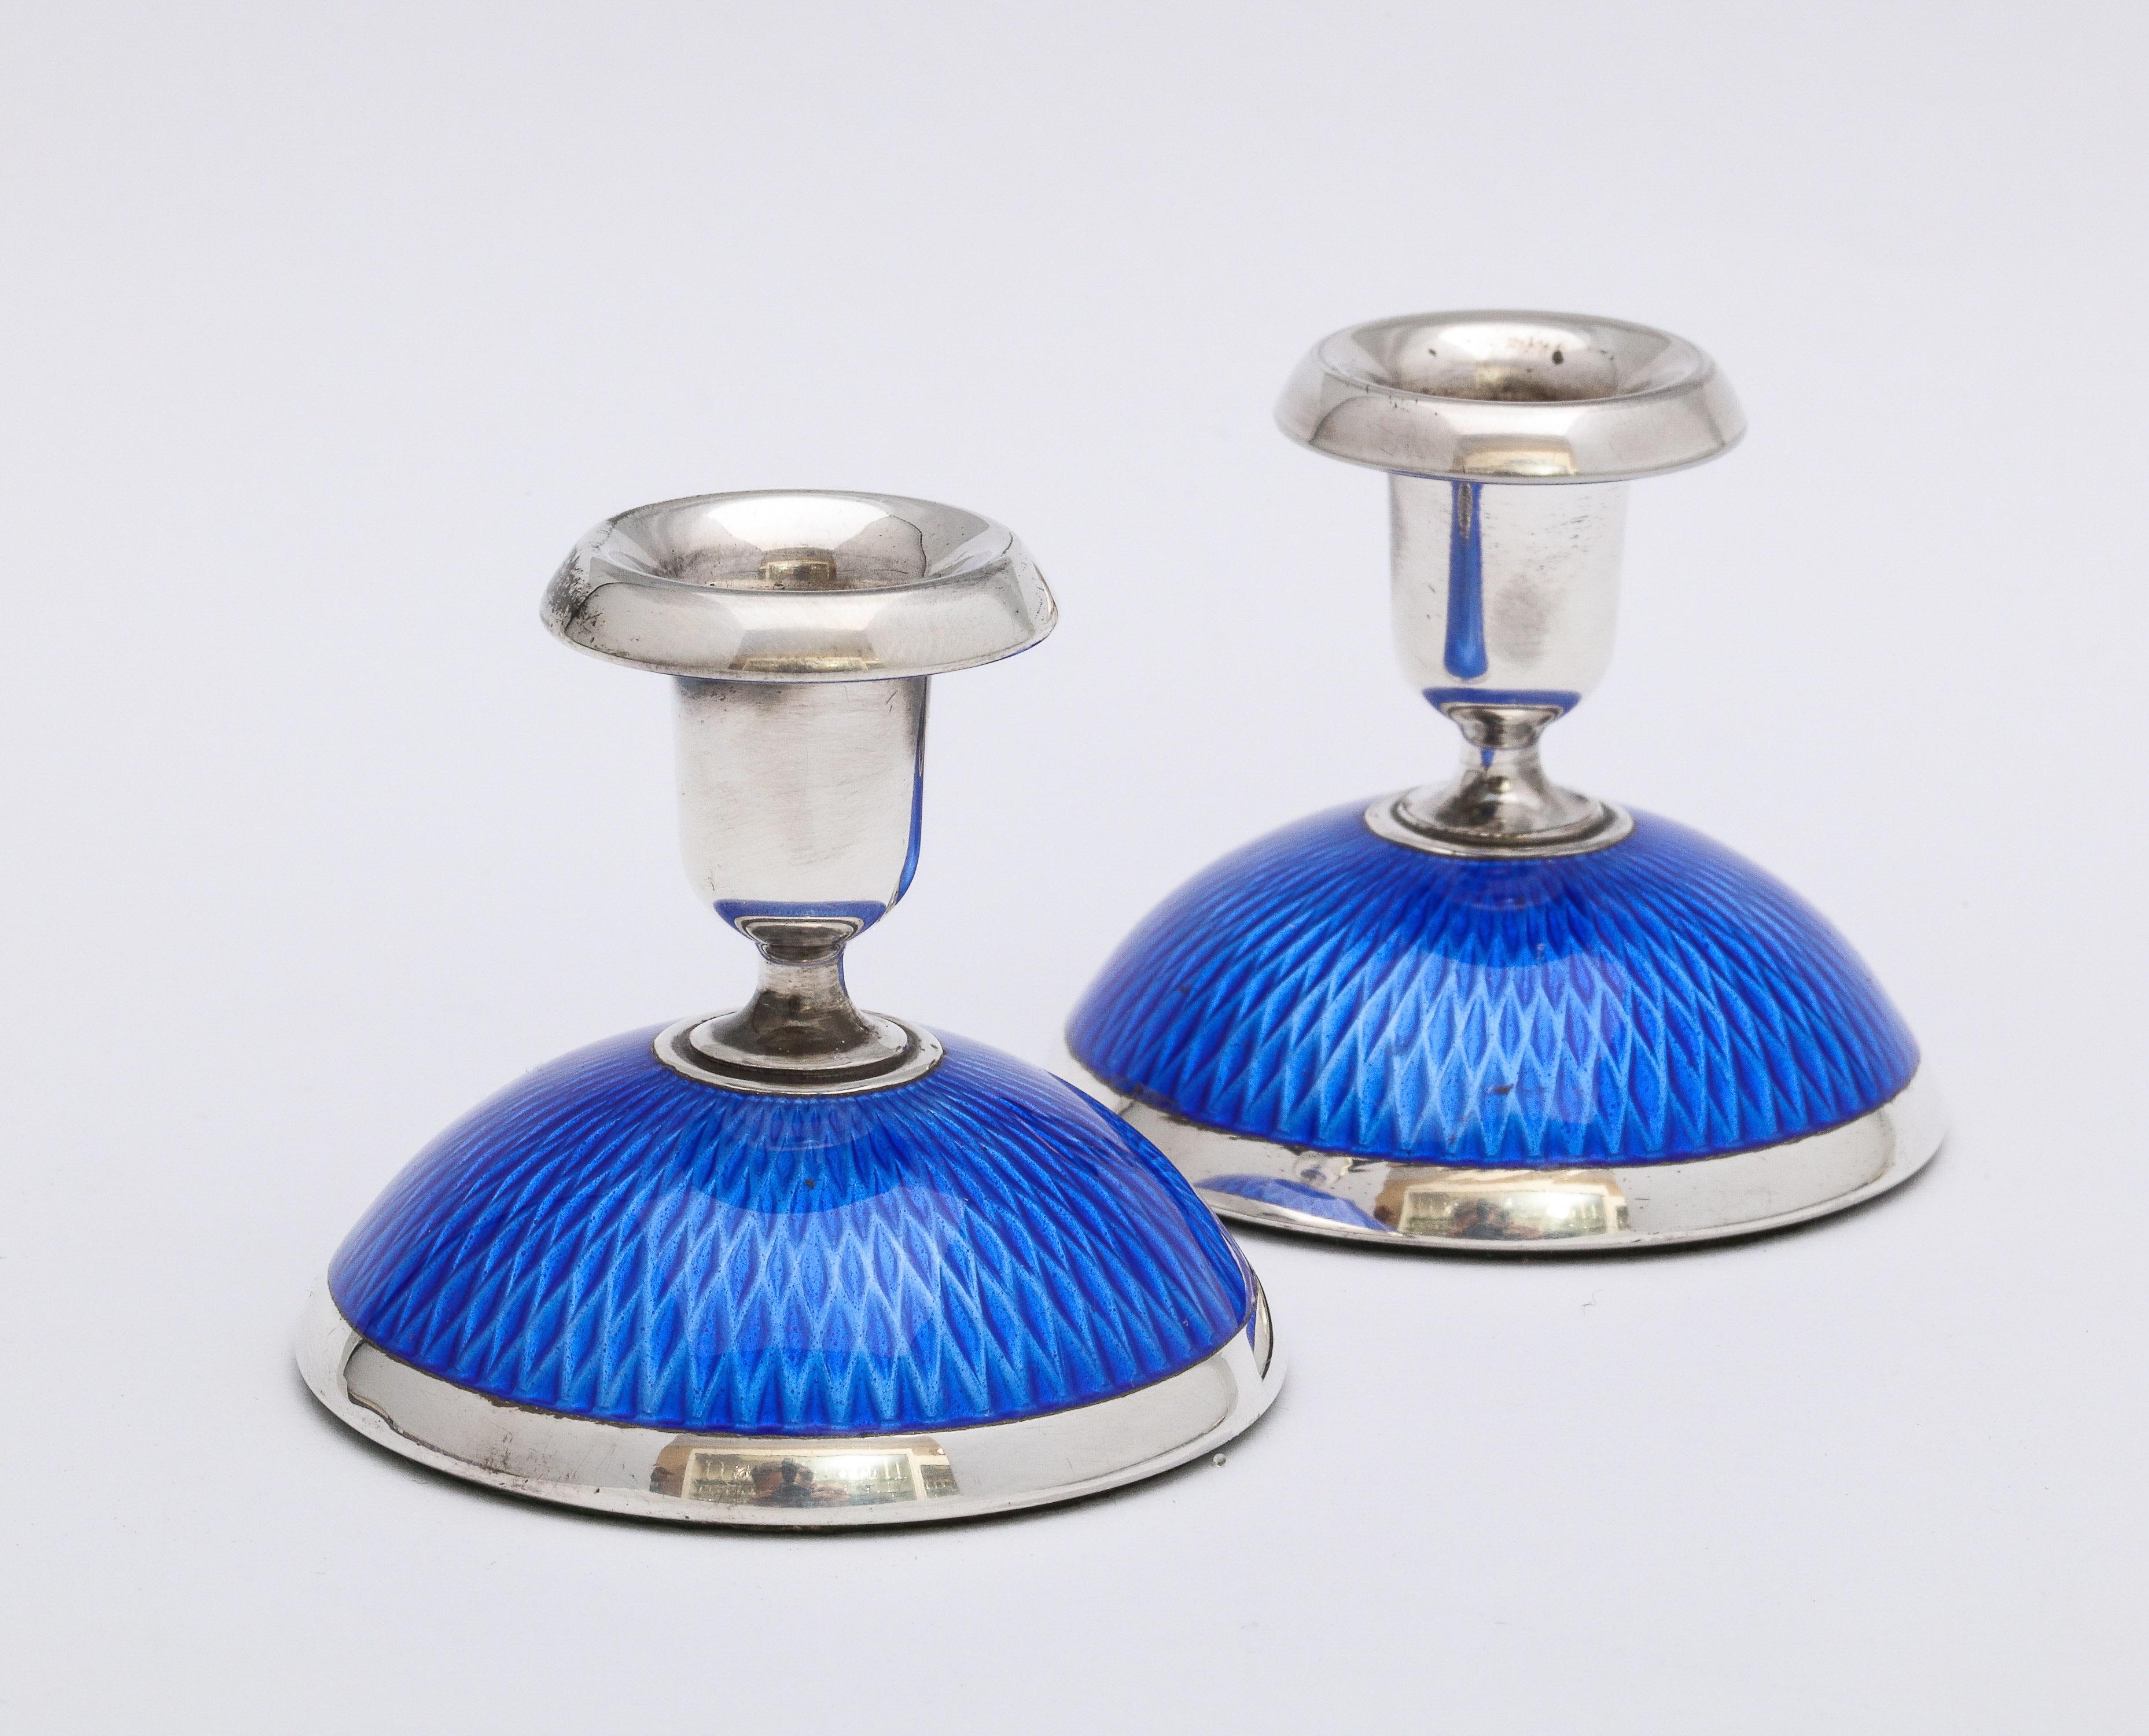 Pair of Art Deco, sterling silver and dark blue guilloche enamel candlesticks, Oslo, Norway, circa 1930s, Norsk Solwarreindustri - makers. Dark blue guilloche enamel seems to shimmer in the light. Each candlestick measures 2 inches high x 2 inches